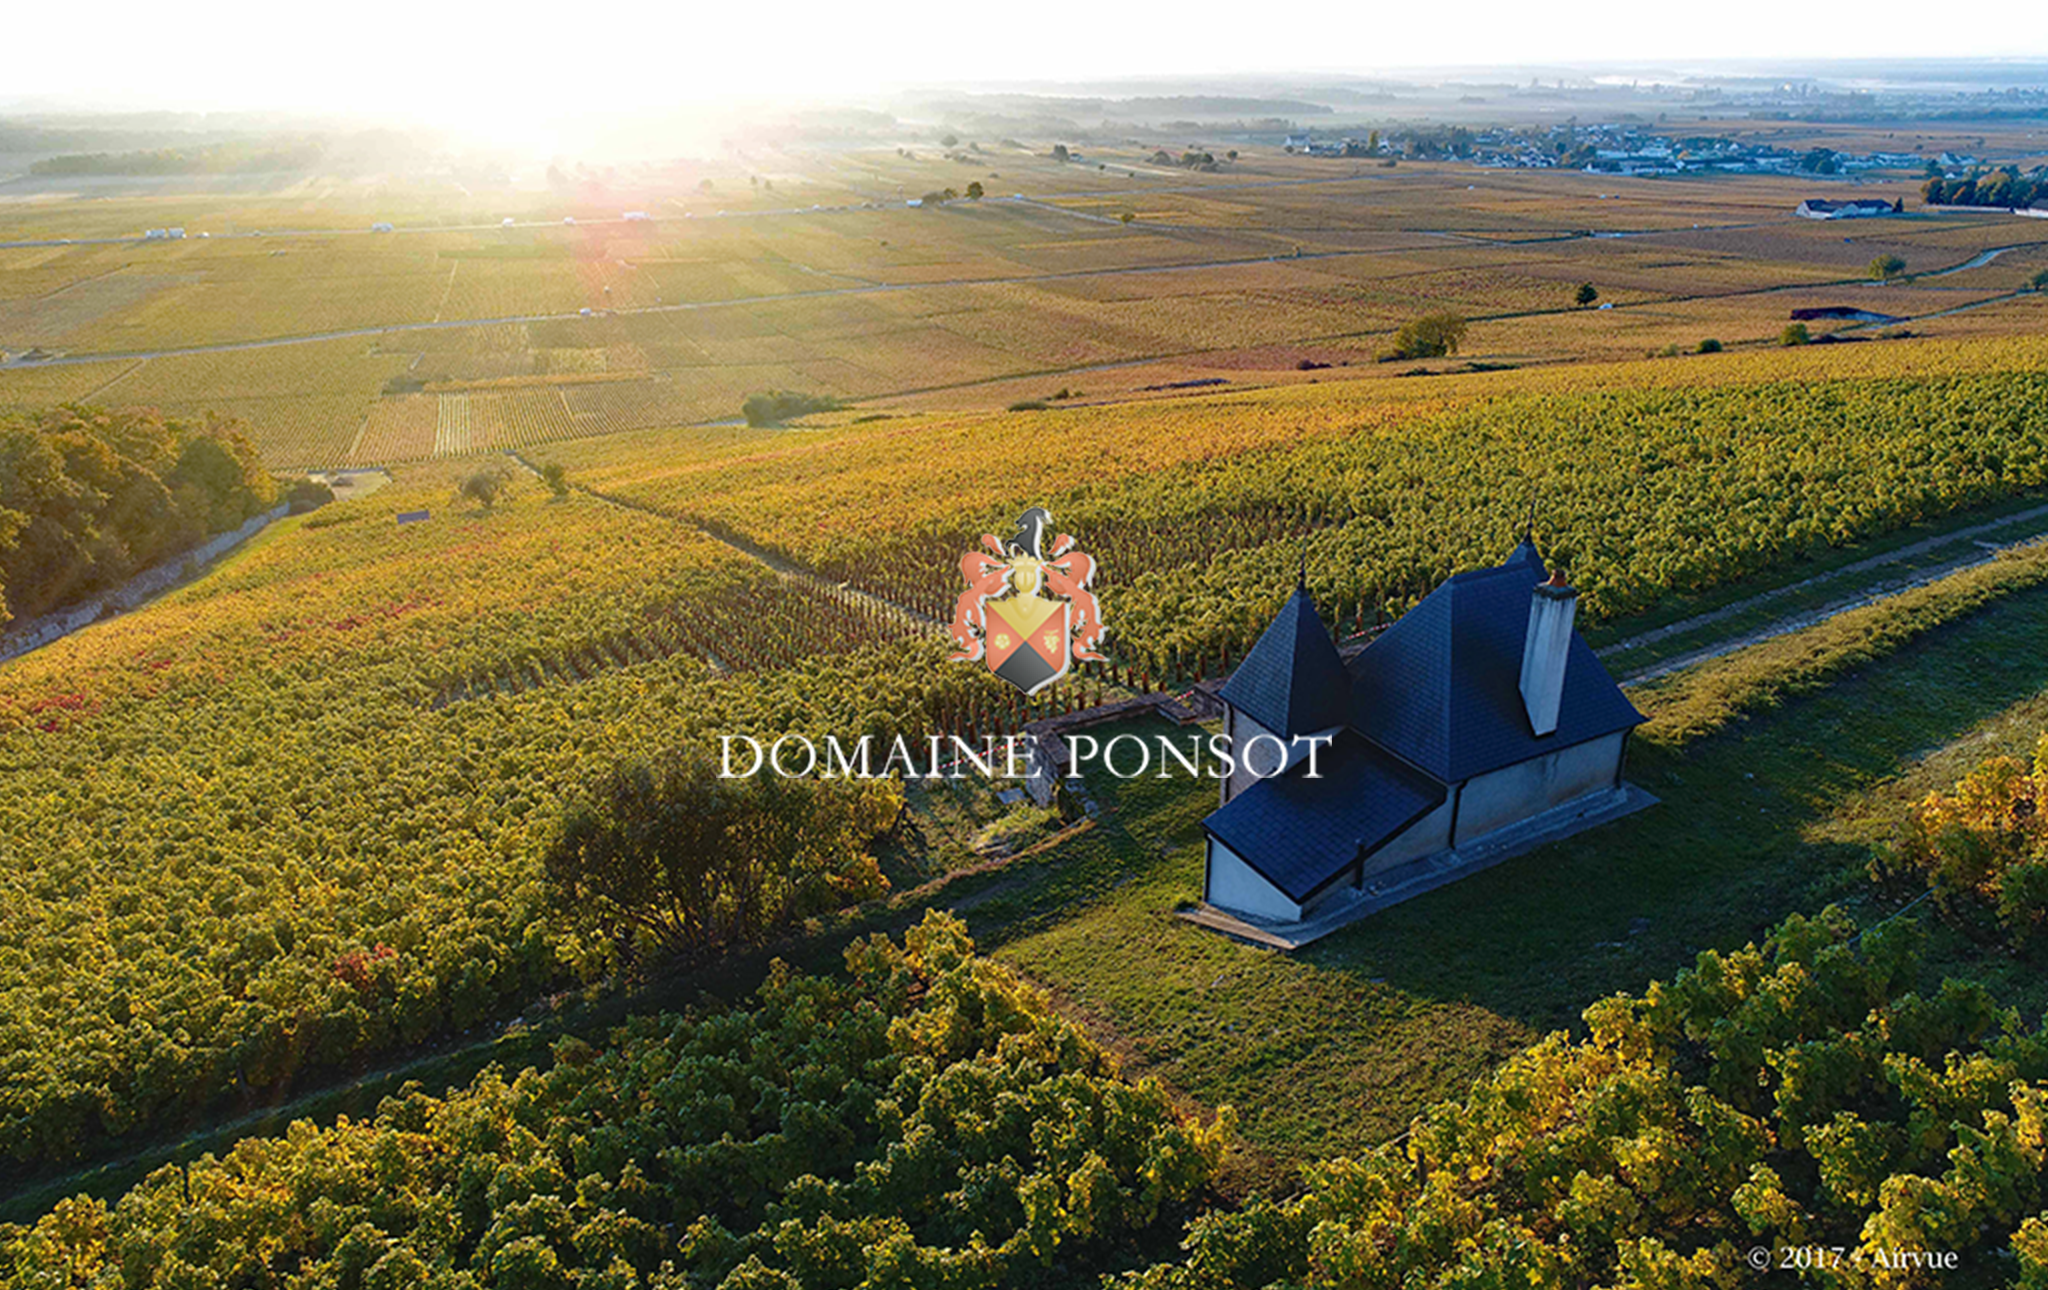 Producer: Domaine Ponsot